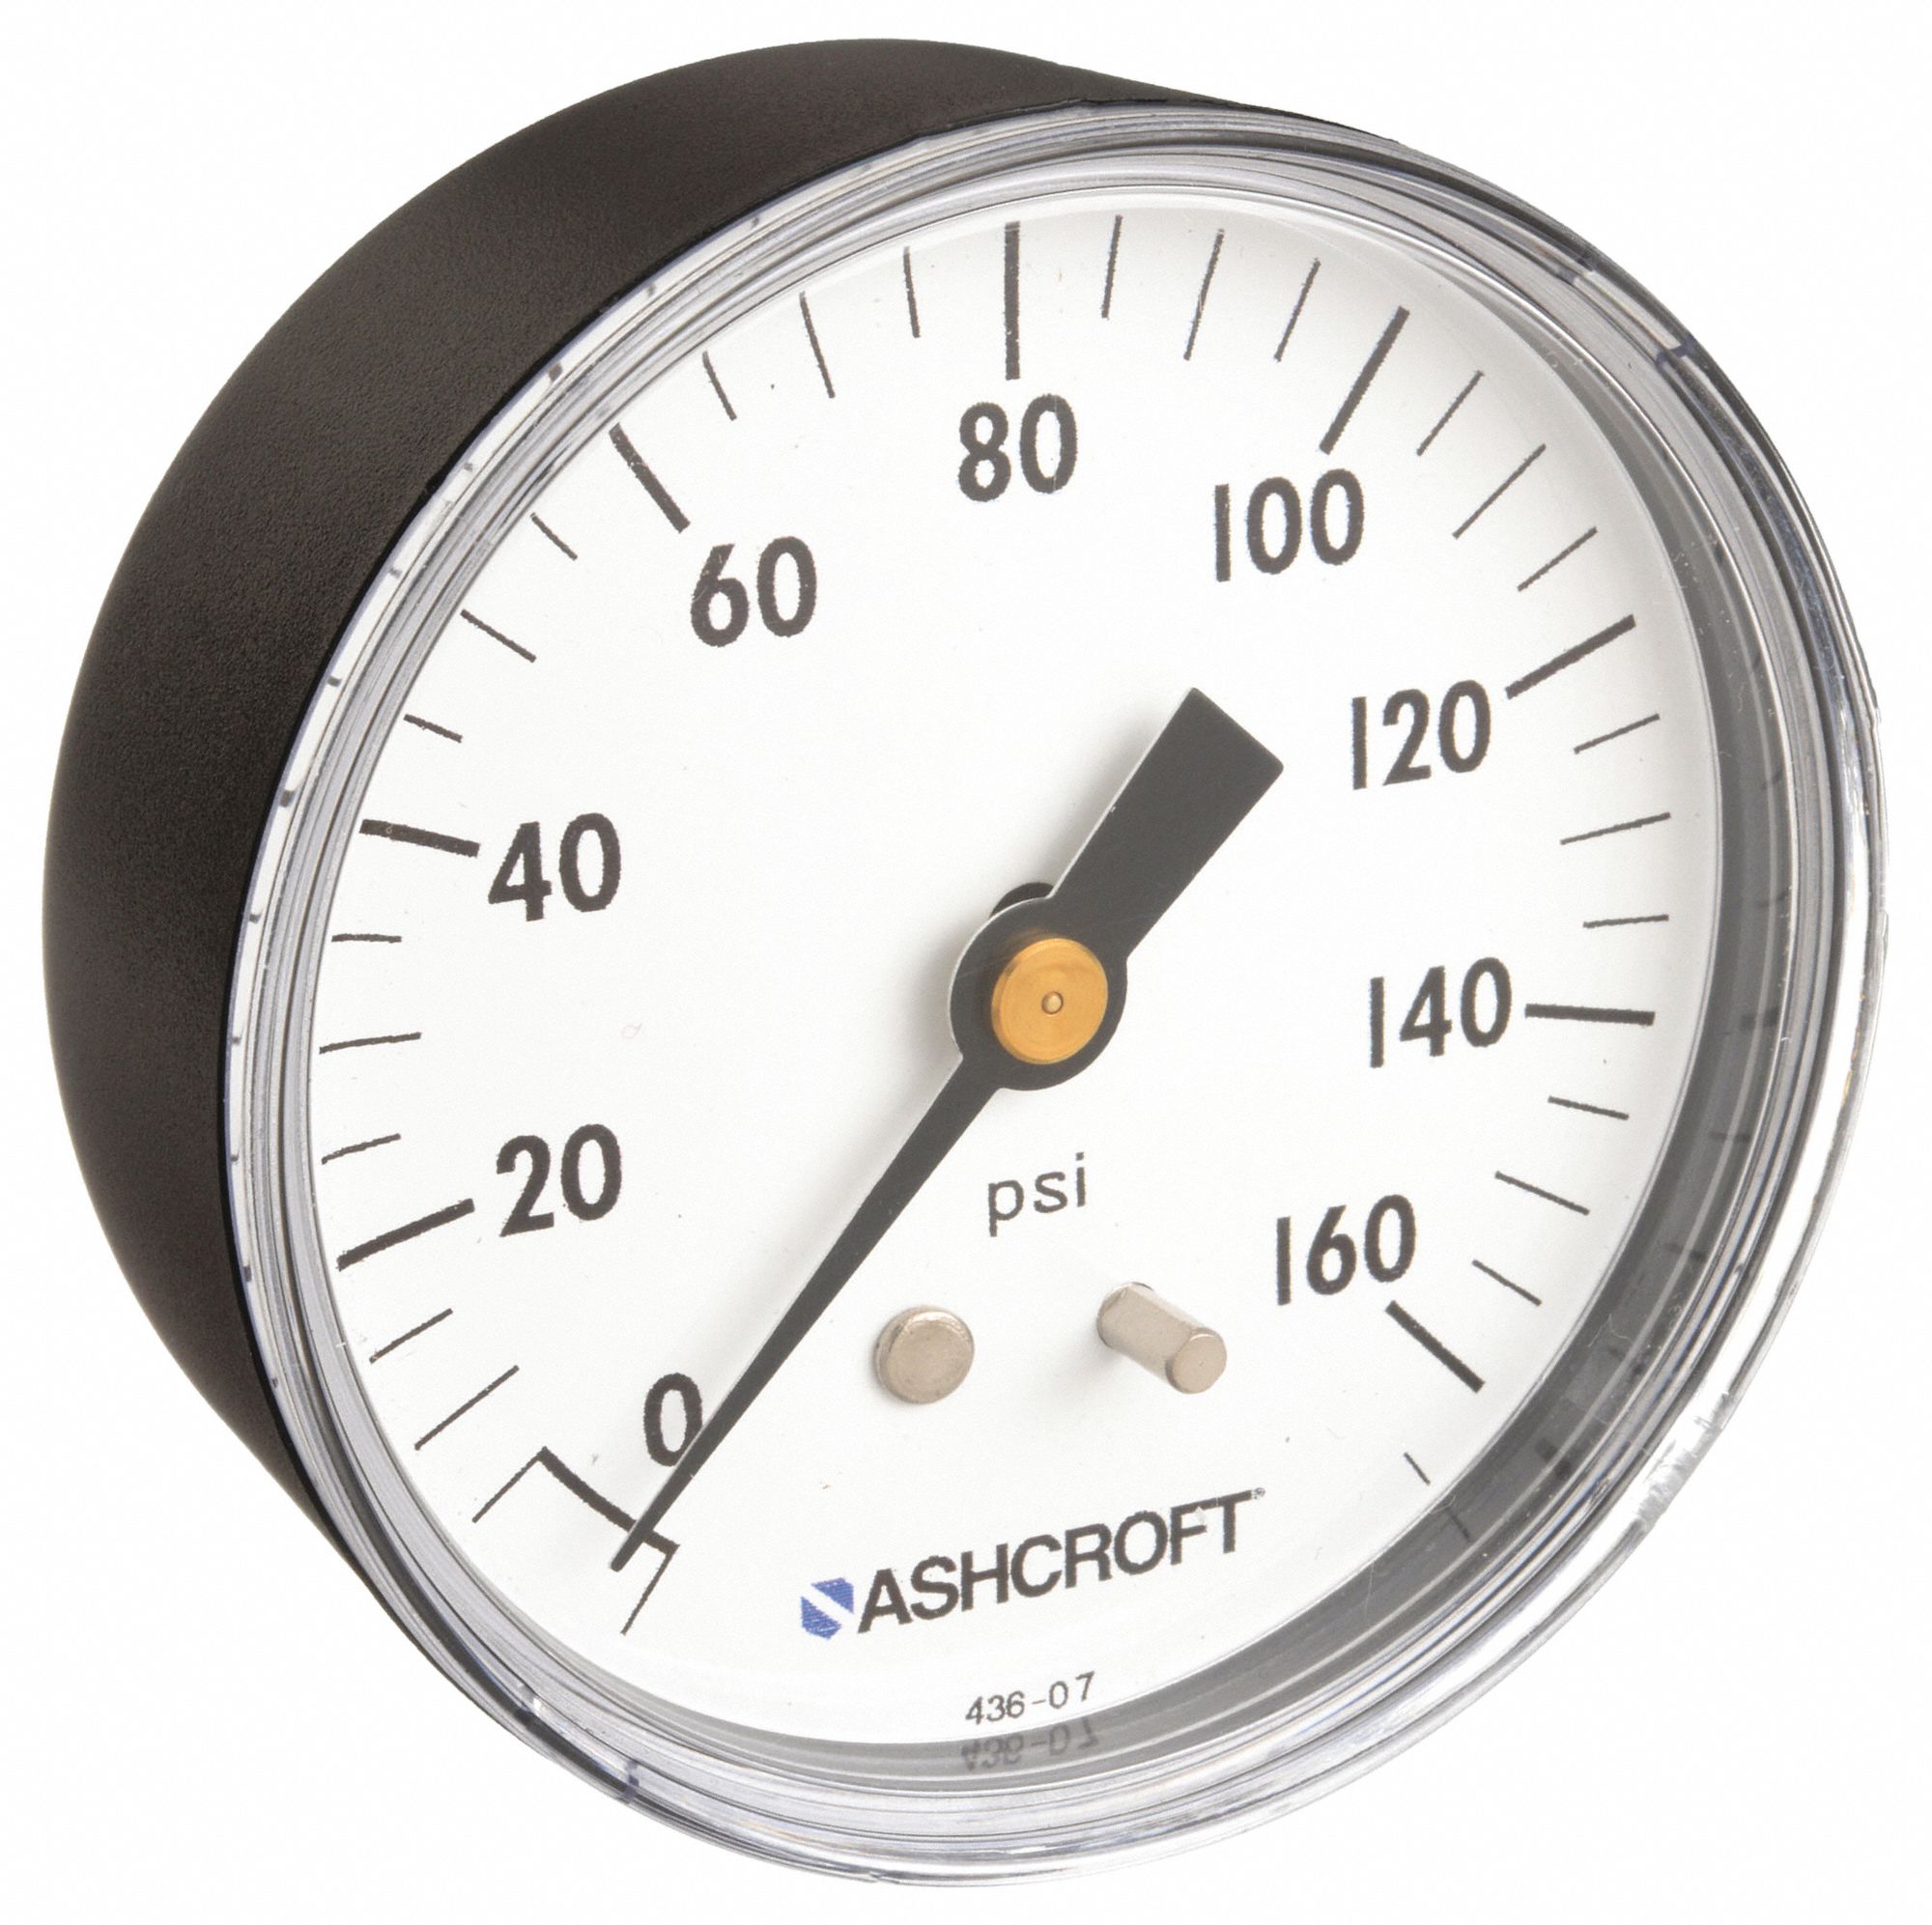 ASHCROFT Industrial Pressure Gauge: 0 to 160 psi, 2 1/2 in Dial, 1/4 in NPT  Male, Center Back